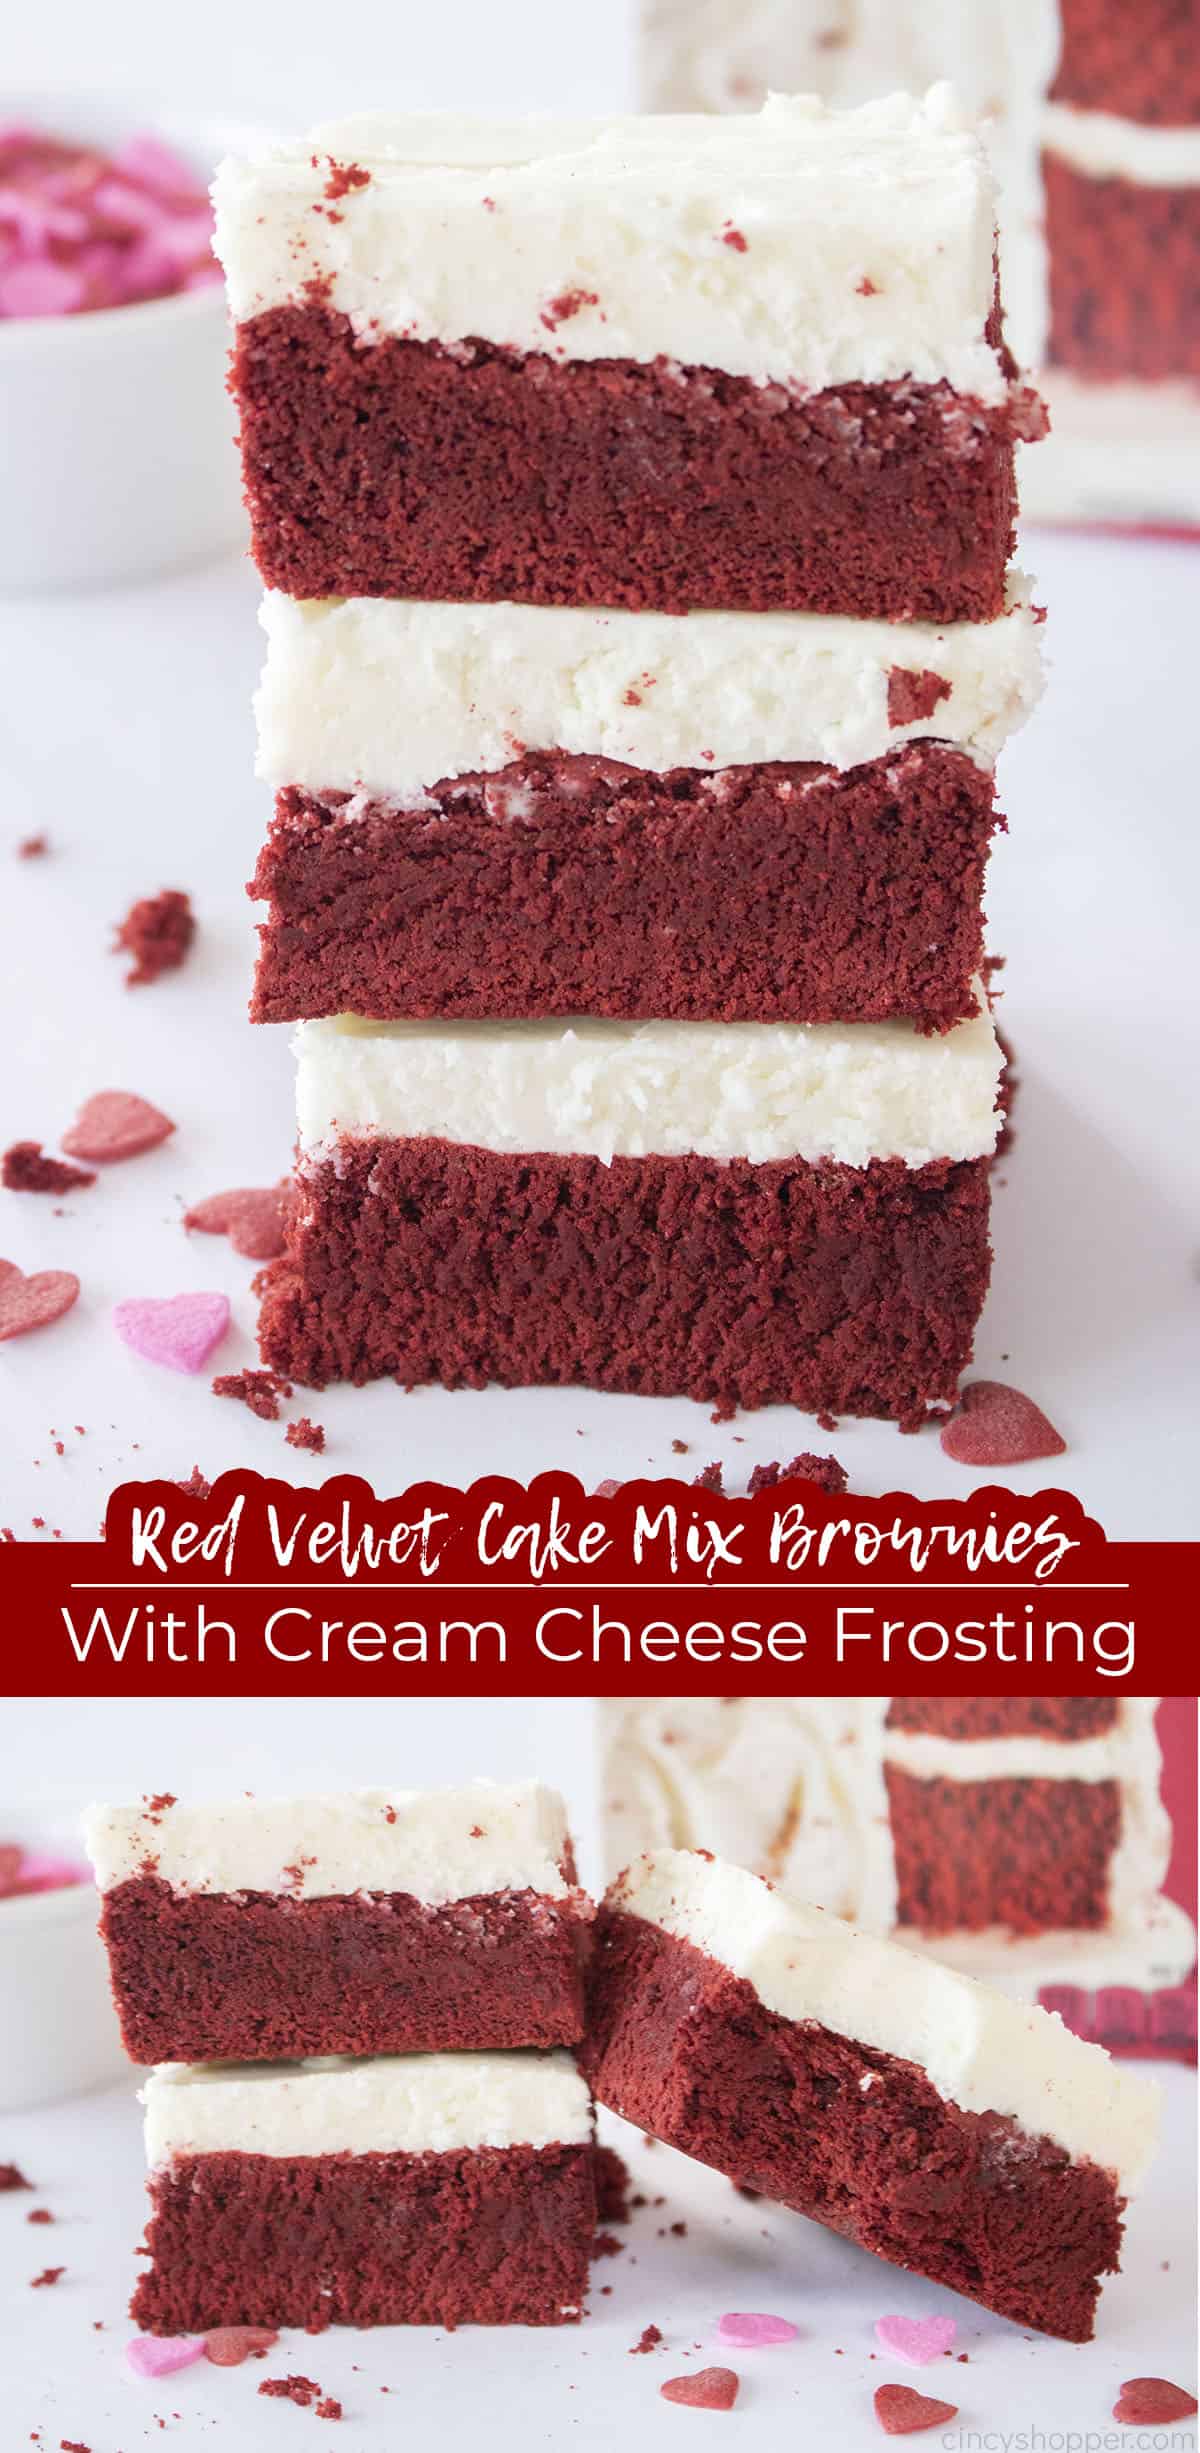 Long pin Text on image Red Velvet Cake Mix Brownies with Cream Cheese Frosting.